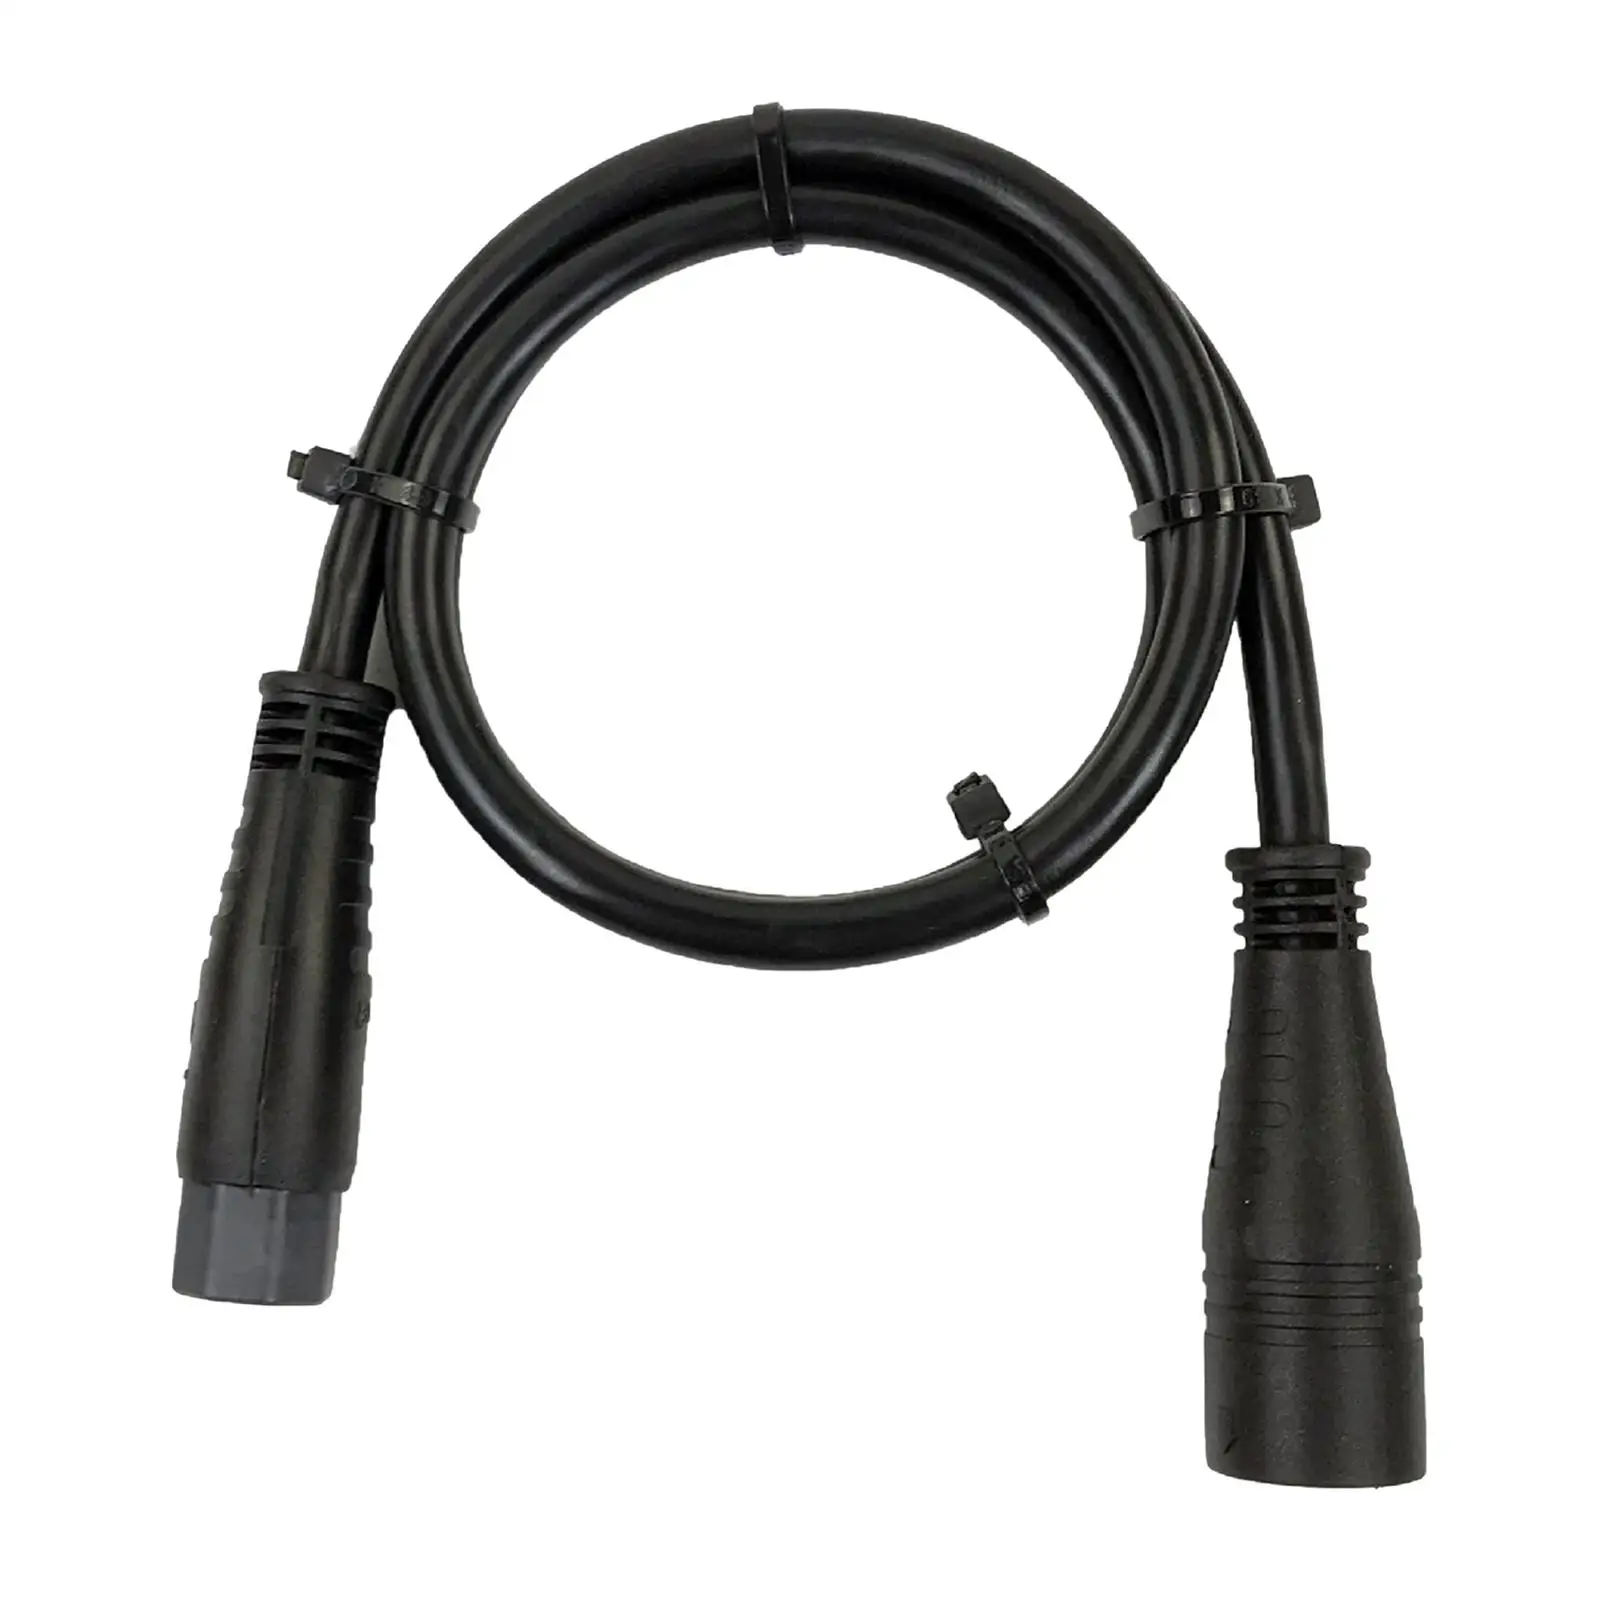 3 Pin Motor Extension Cable Cord for E Bike Electric Bicycle Accessories